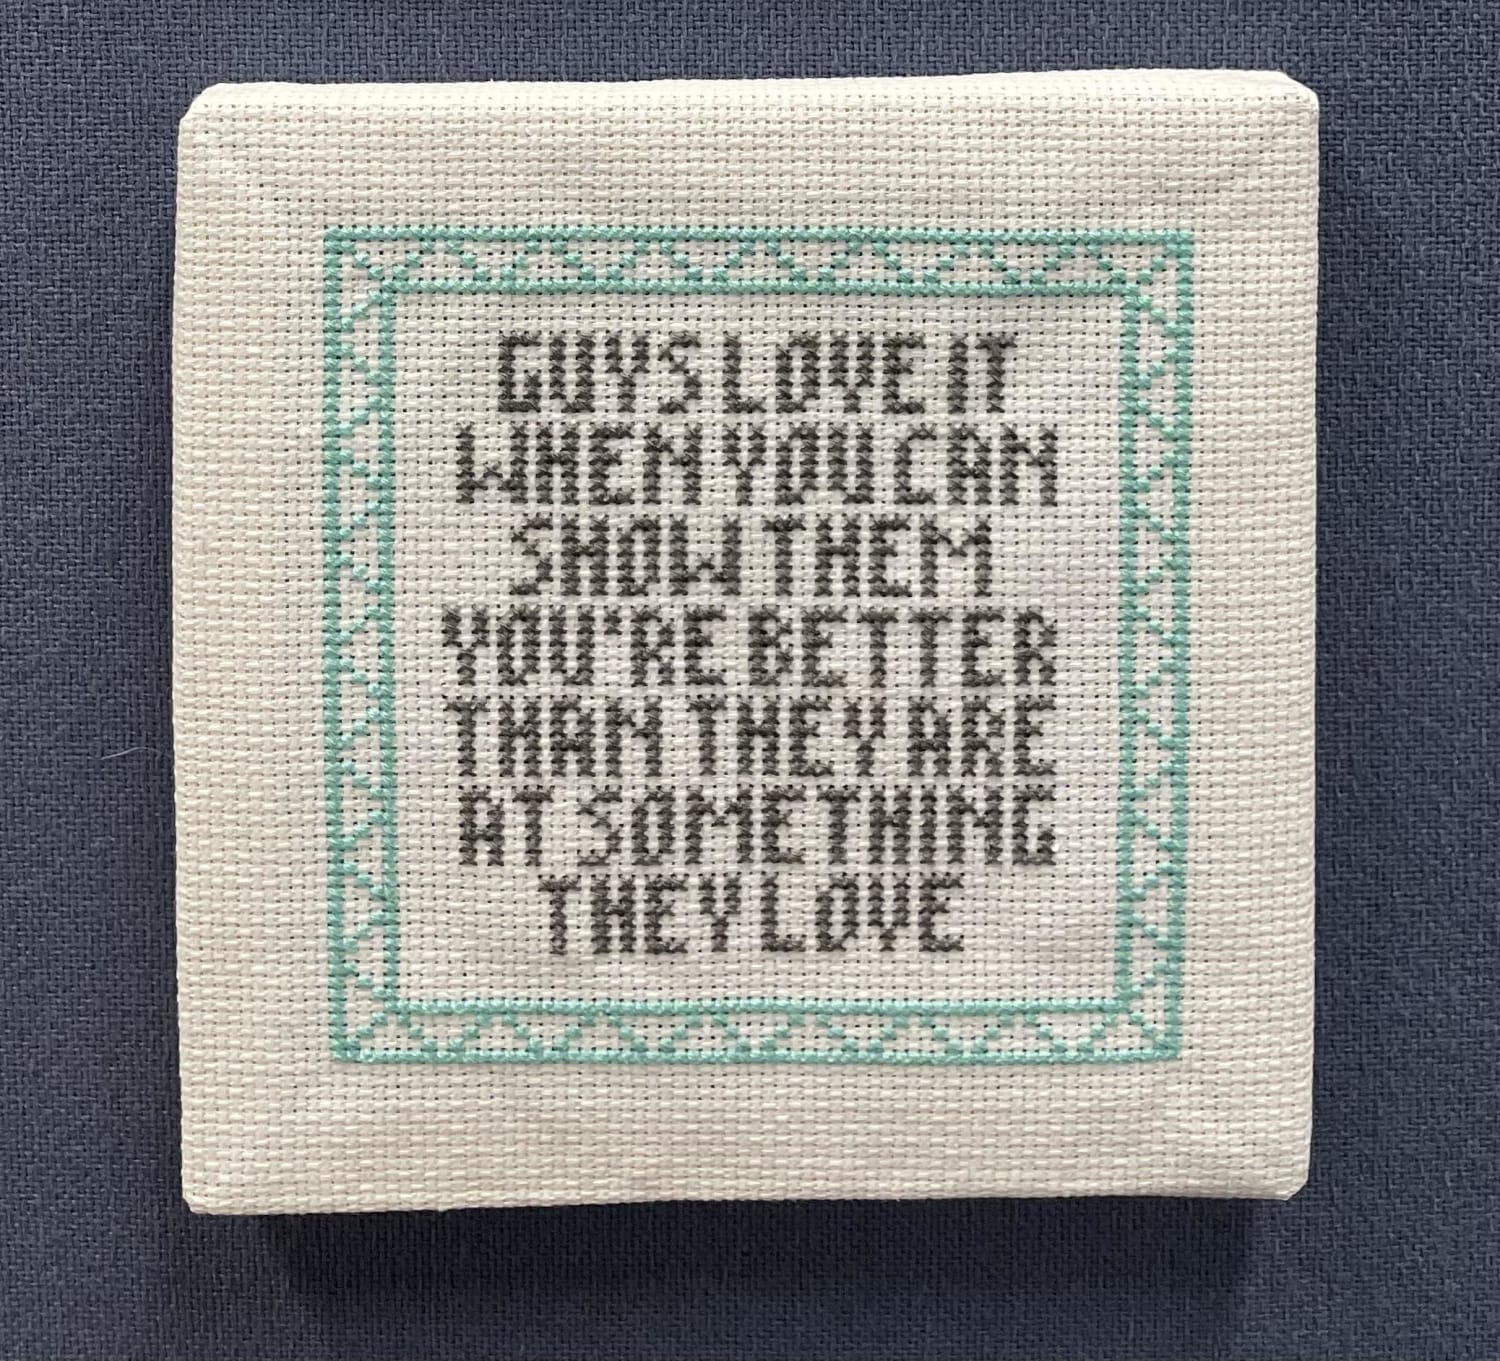 [FO] Made this for my office. I’m an engineer so it’s mostly men